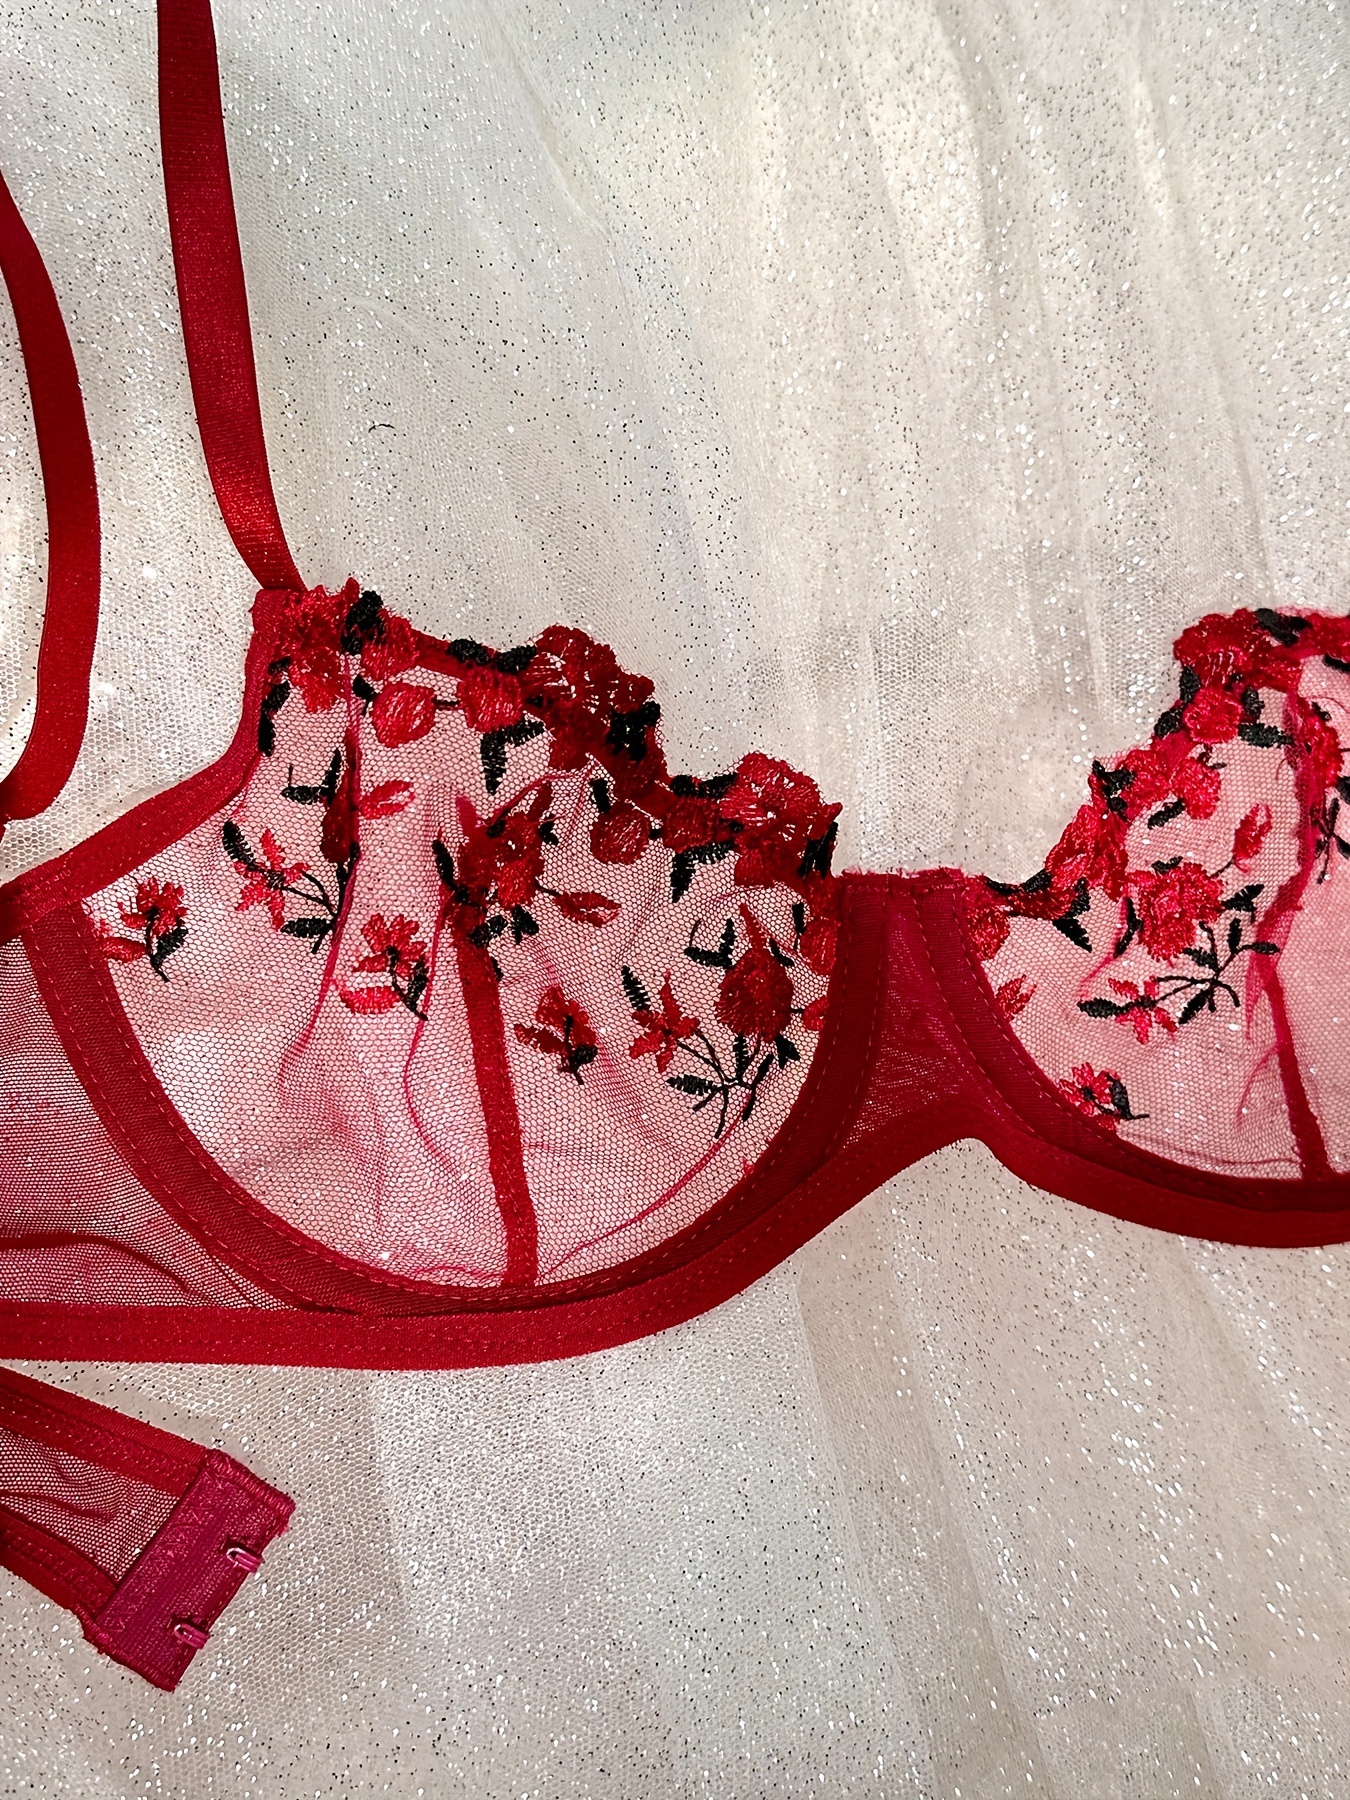 Victoria's Secret VERY SEXY BRA SET lace unlined embroidery floral red panty